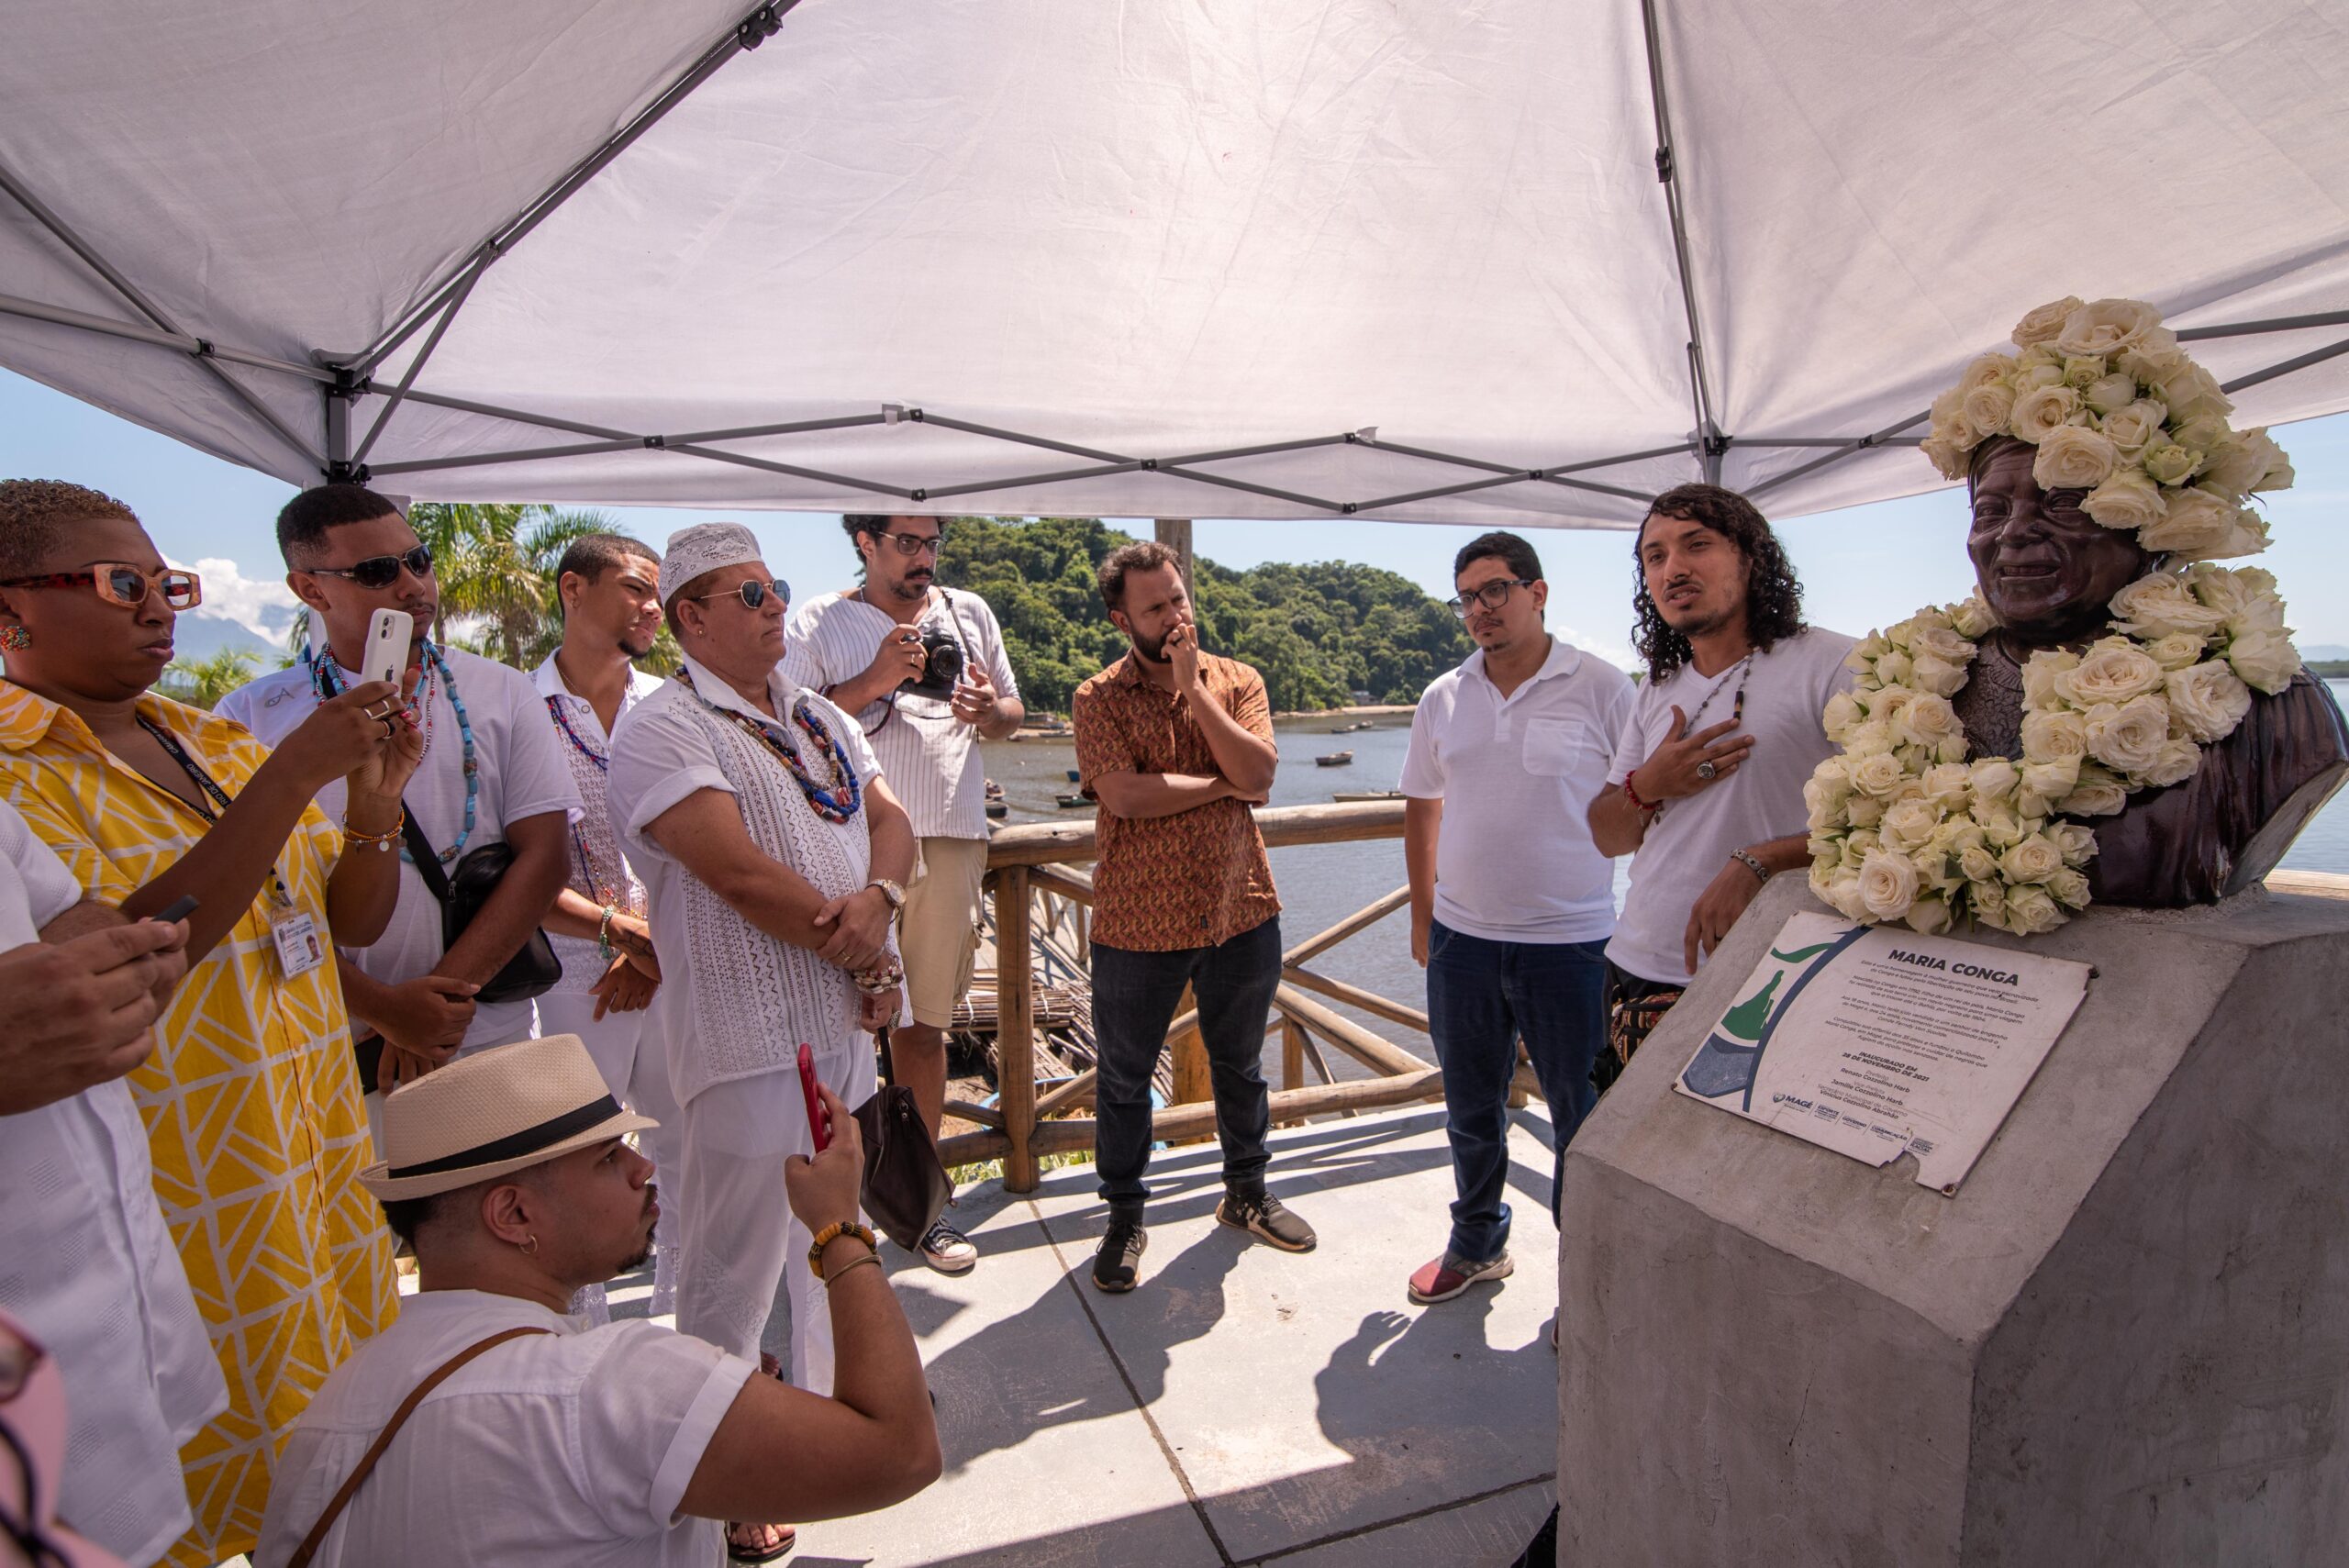 Participants at the ceremony “Maria Conga’s Coronation” in an act of defiance against the Nazi and racist vandalism of the bust. Photo: Bárbara Dias